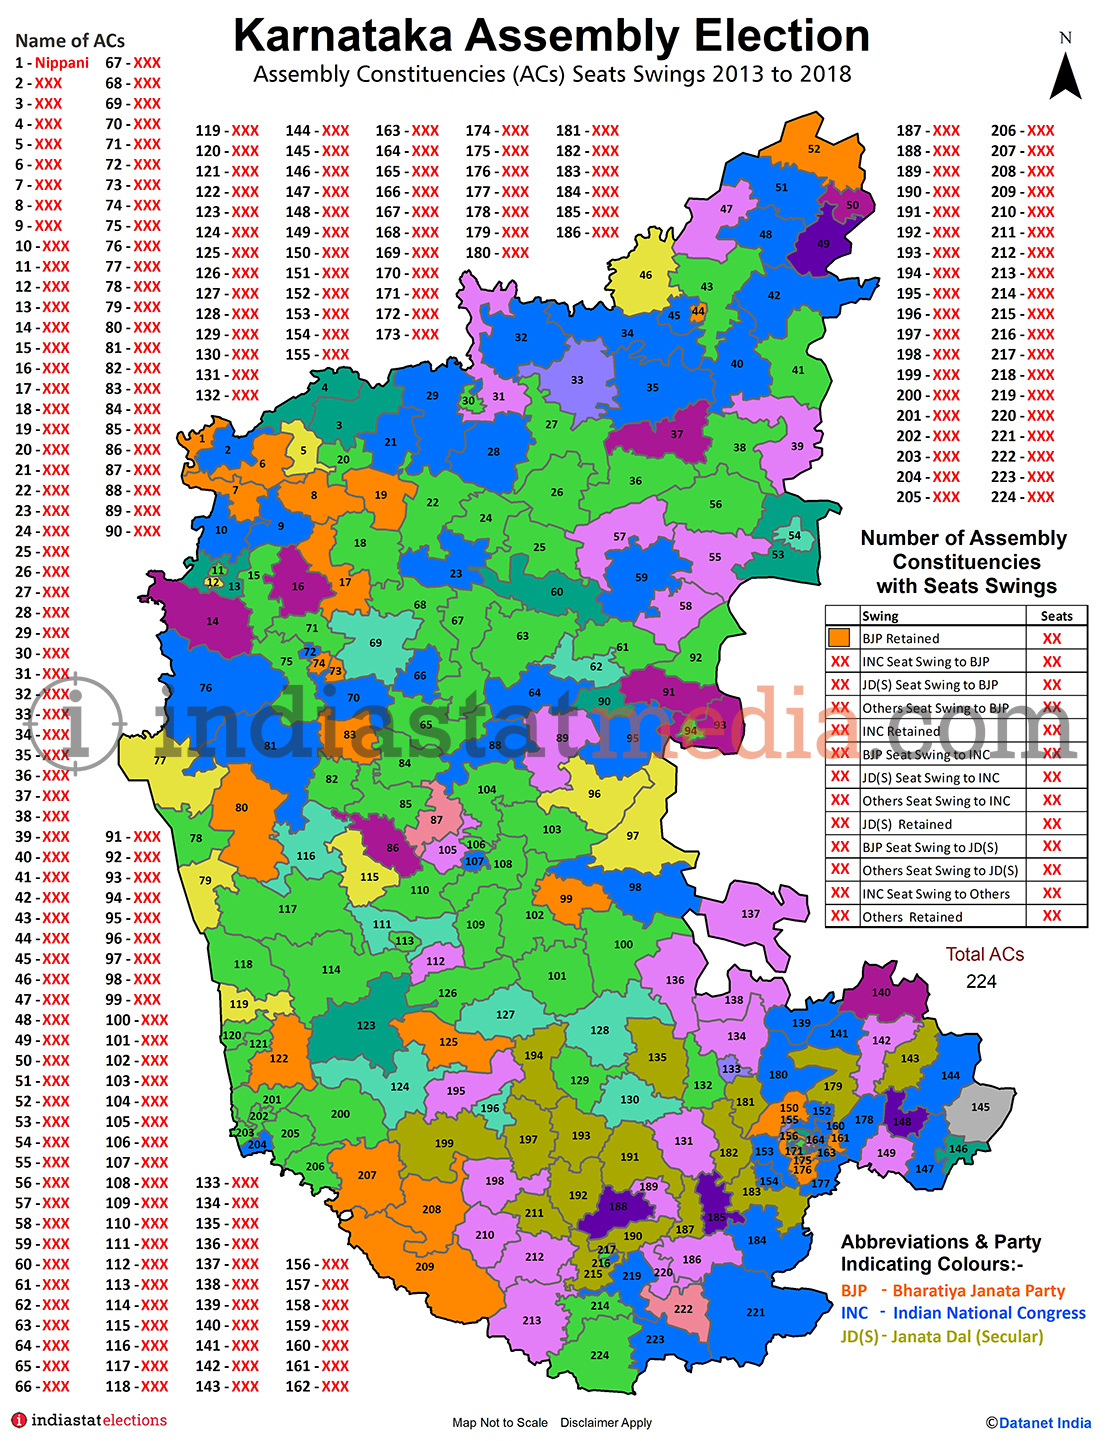 Assembly Constituencies with Seats Swings in Karnataka Assembly Elections (2013 to 2018)